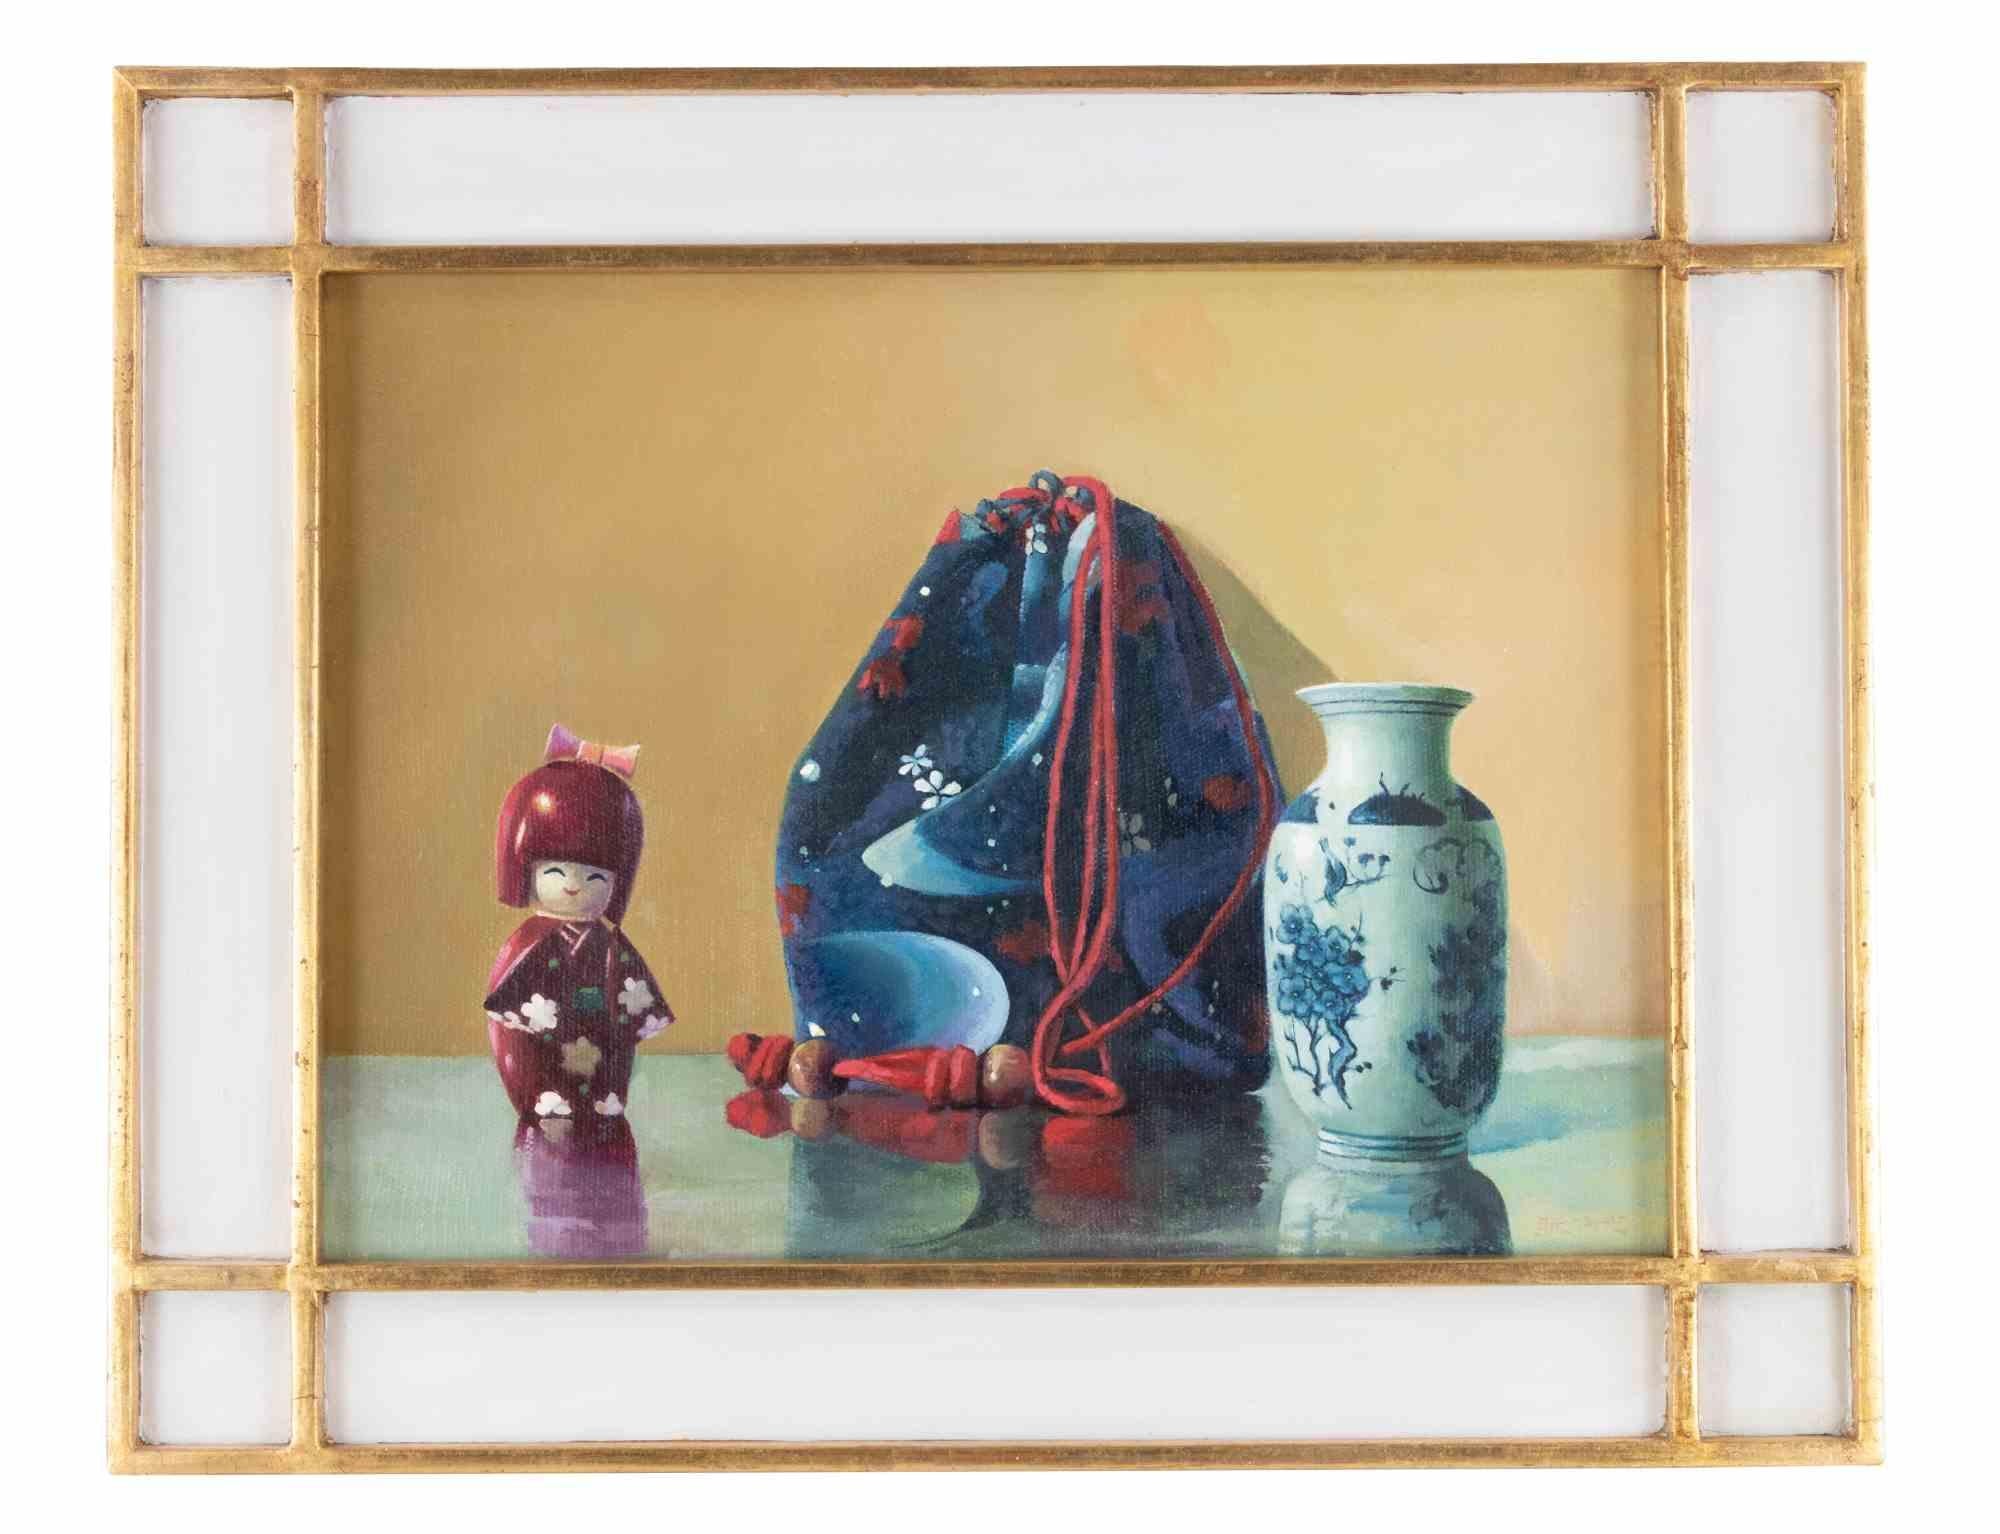 Vase and doll is an oil painting realized in 2010s by Zhang Wei Guang (Mirror).

Oil painting on canvas. 

Includes frame.


Zhang Wei Guang , also called ‘mirror' was born in Helong Jang, China in 1968. Having made a deep formative research about